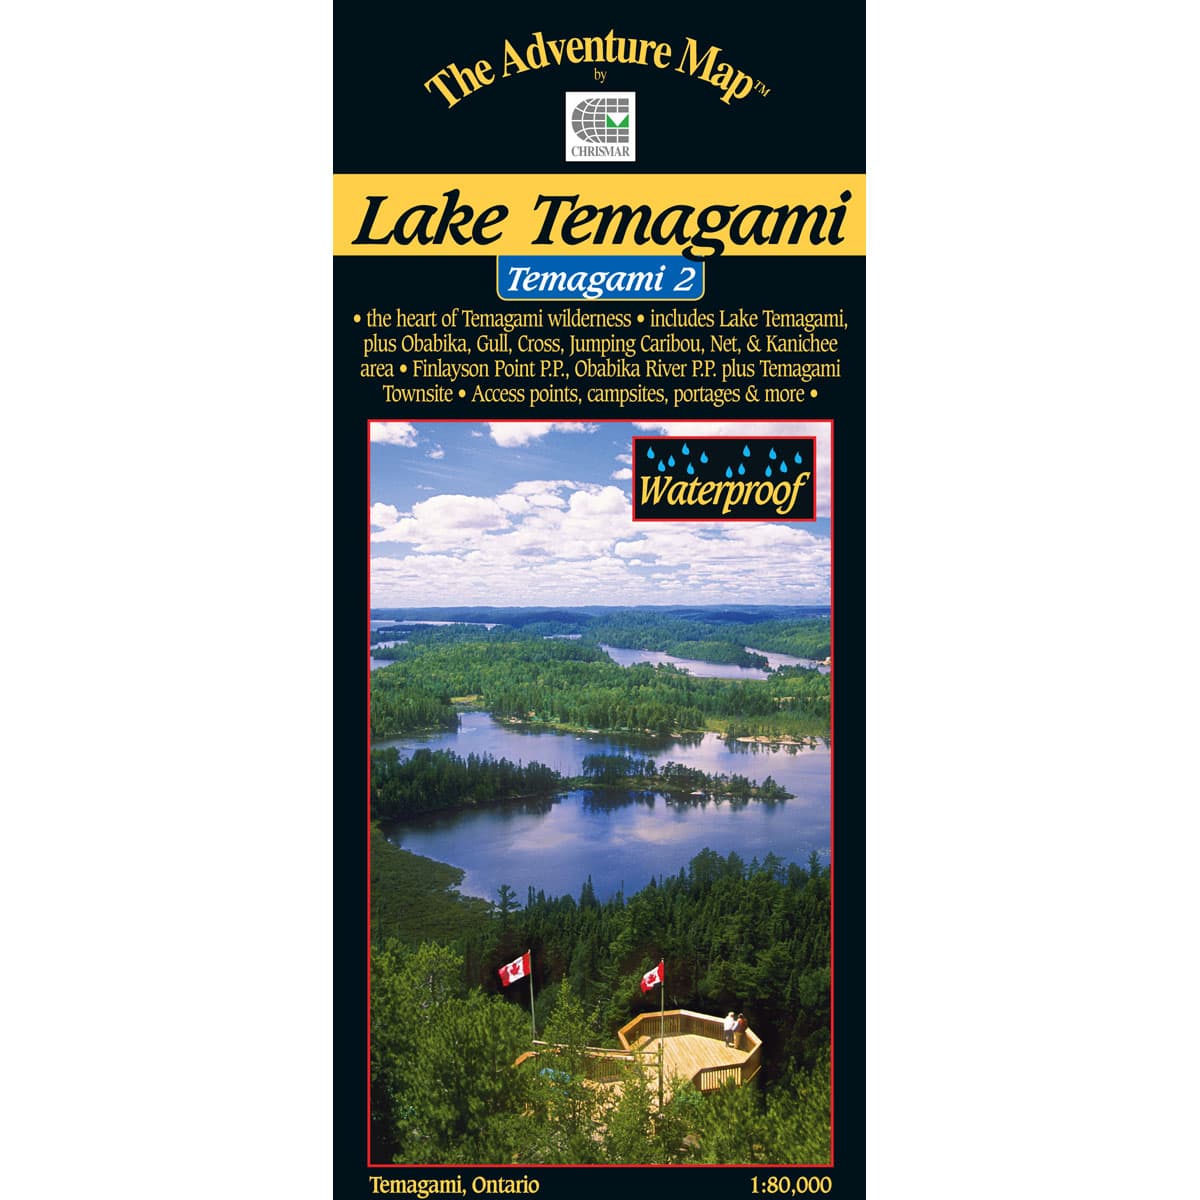 The Adventure Map Temagami 2 Lake Temagami 